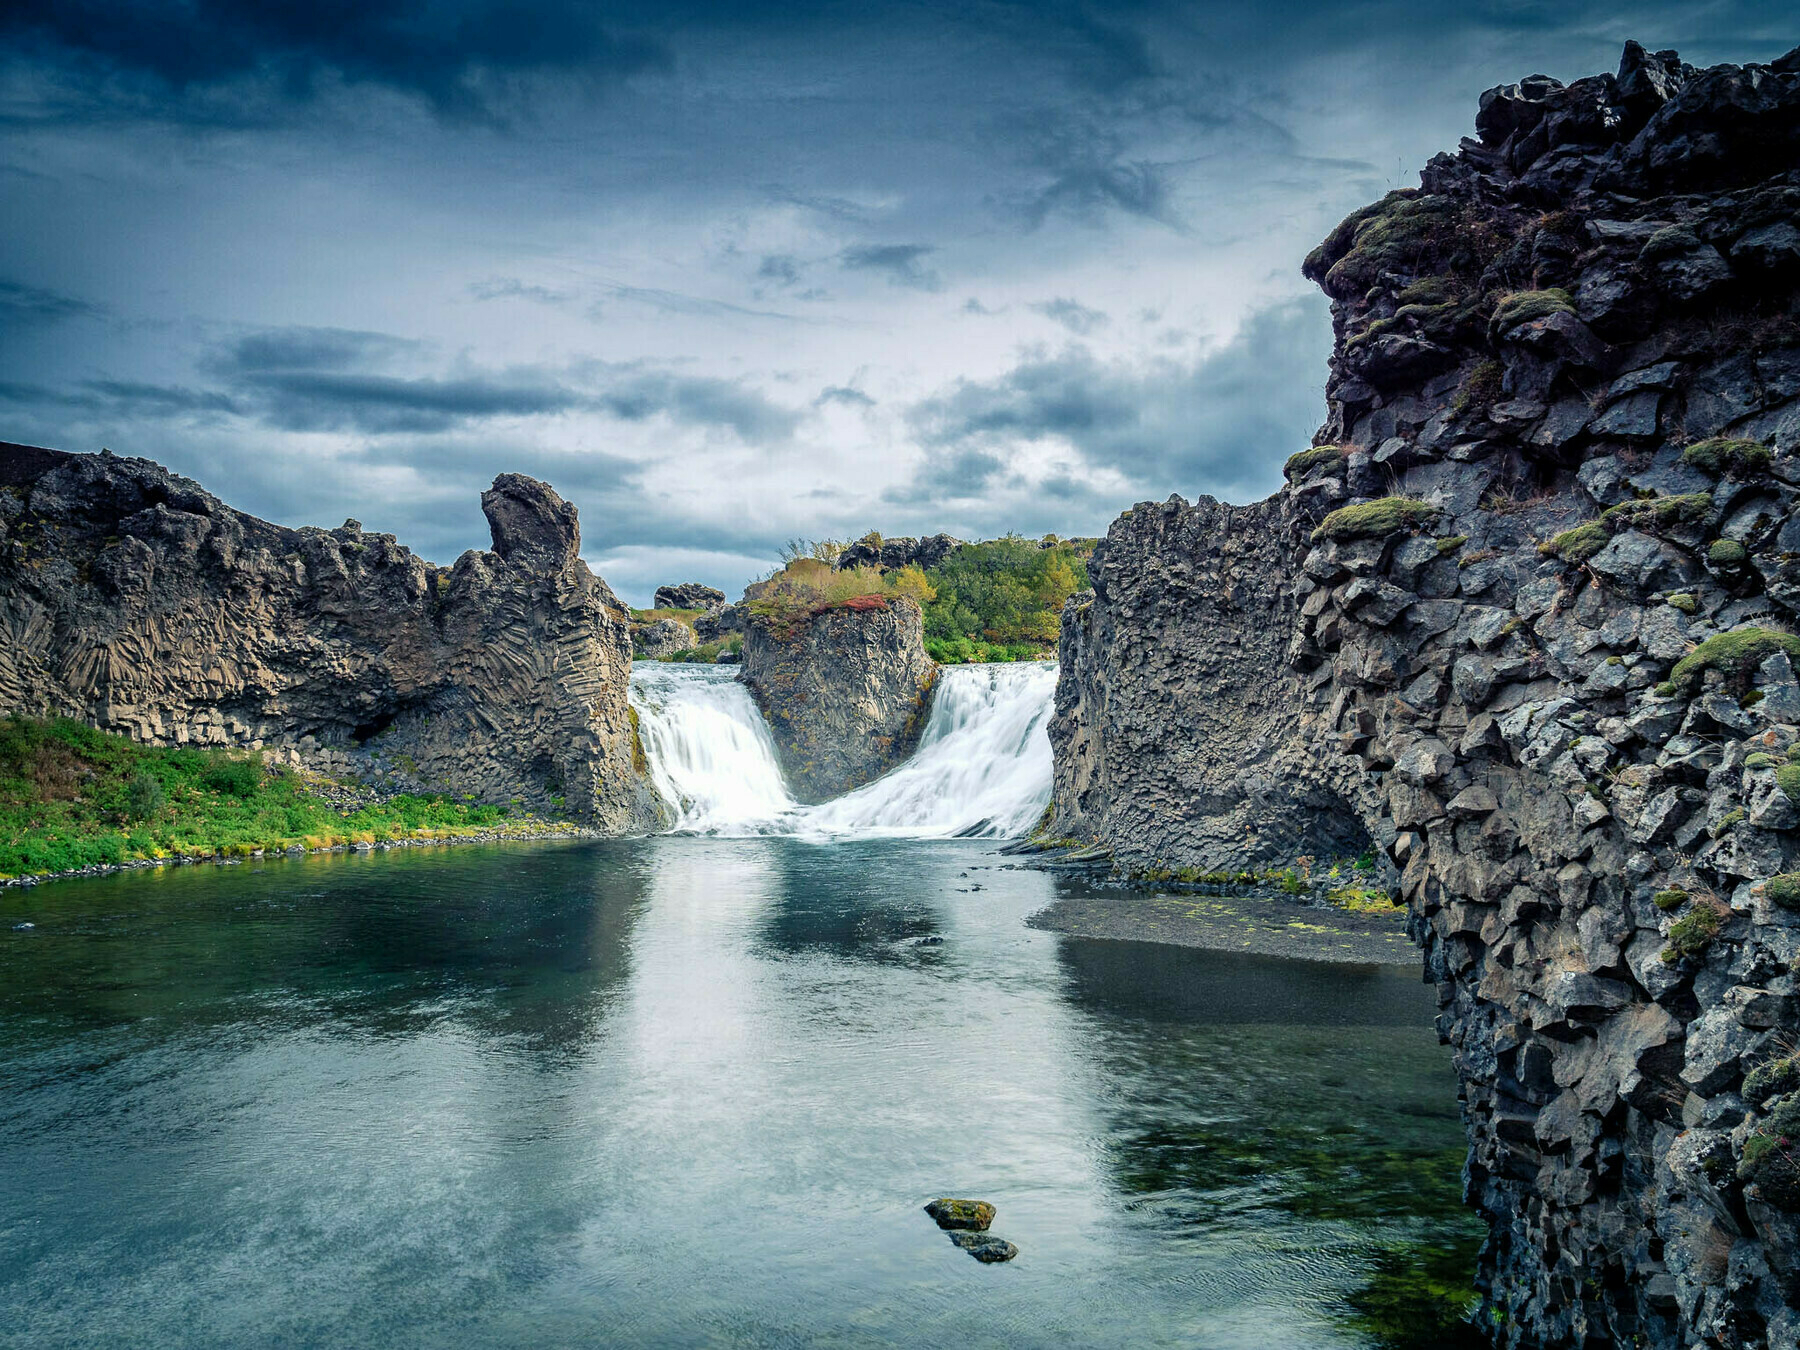 Image of Hjálparfoss—a double waterfall in the Icelandic Highlands.